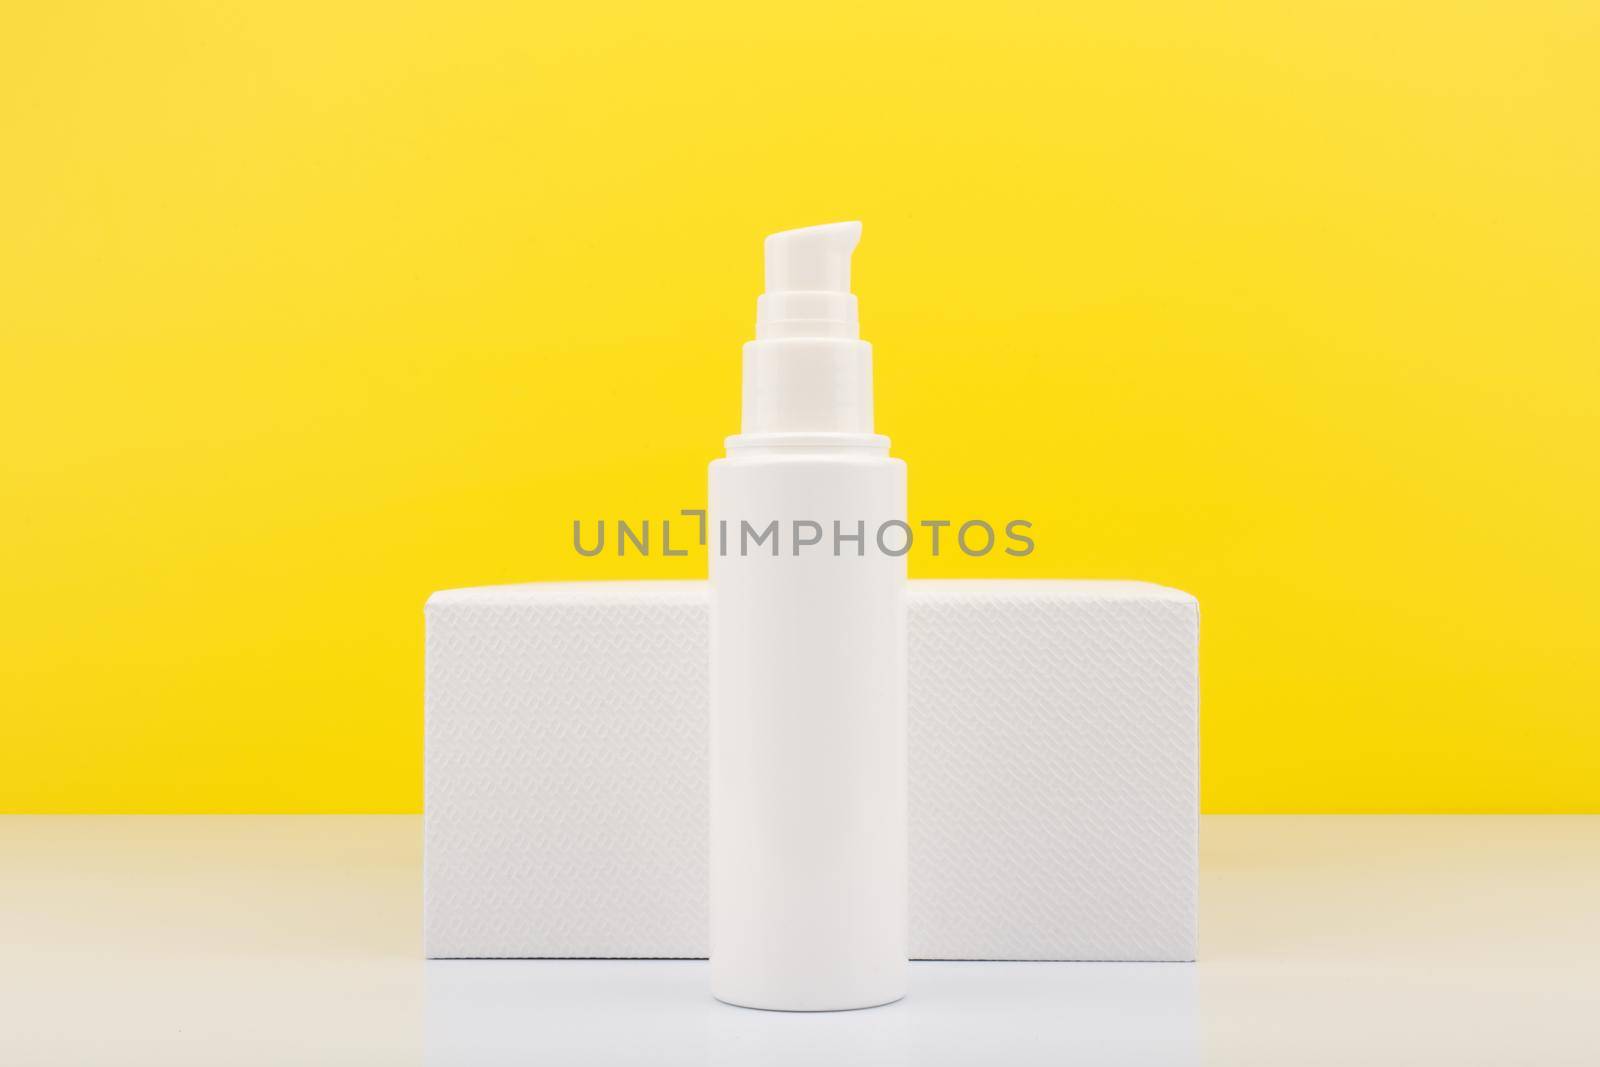 Face moisturizing cream or lotion in tall white tube against white geometric podium and yellow background with copy space. Concept of skin moisturizing and protective treatment with Spf for summer